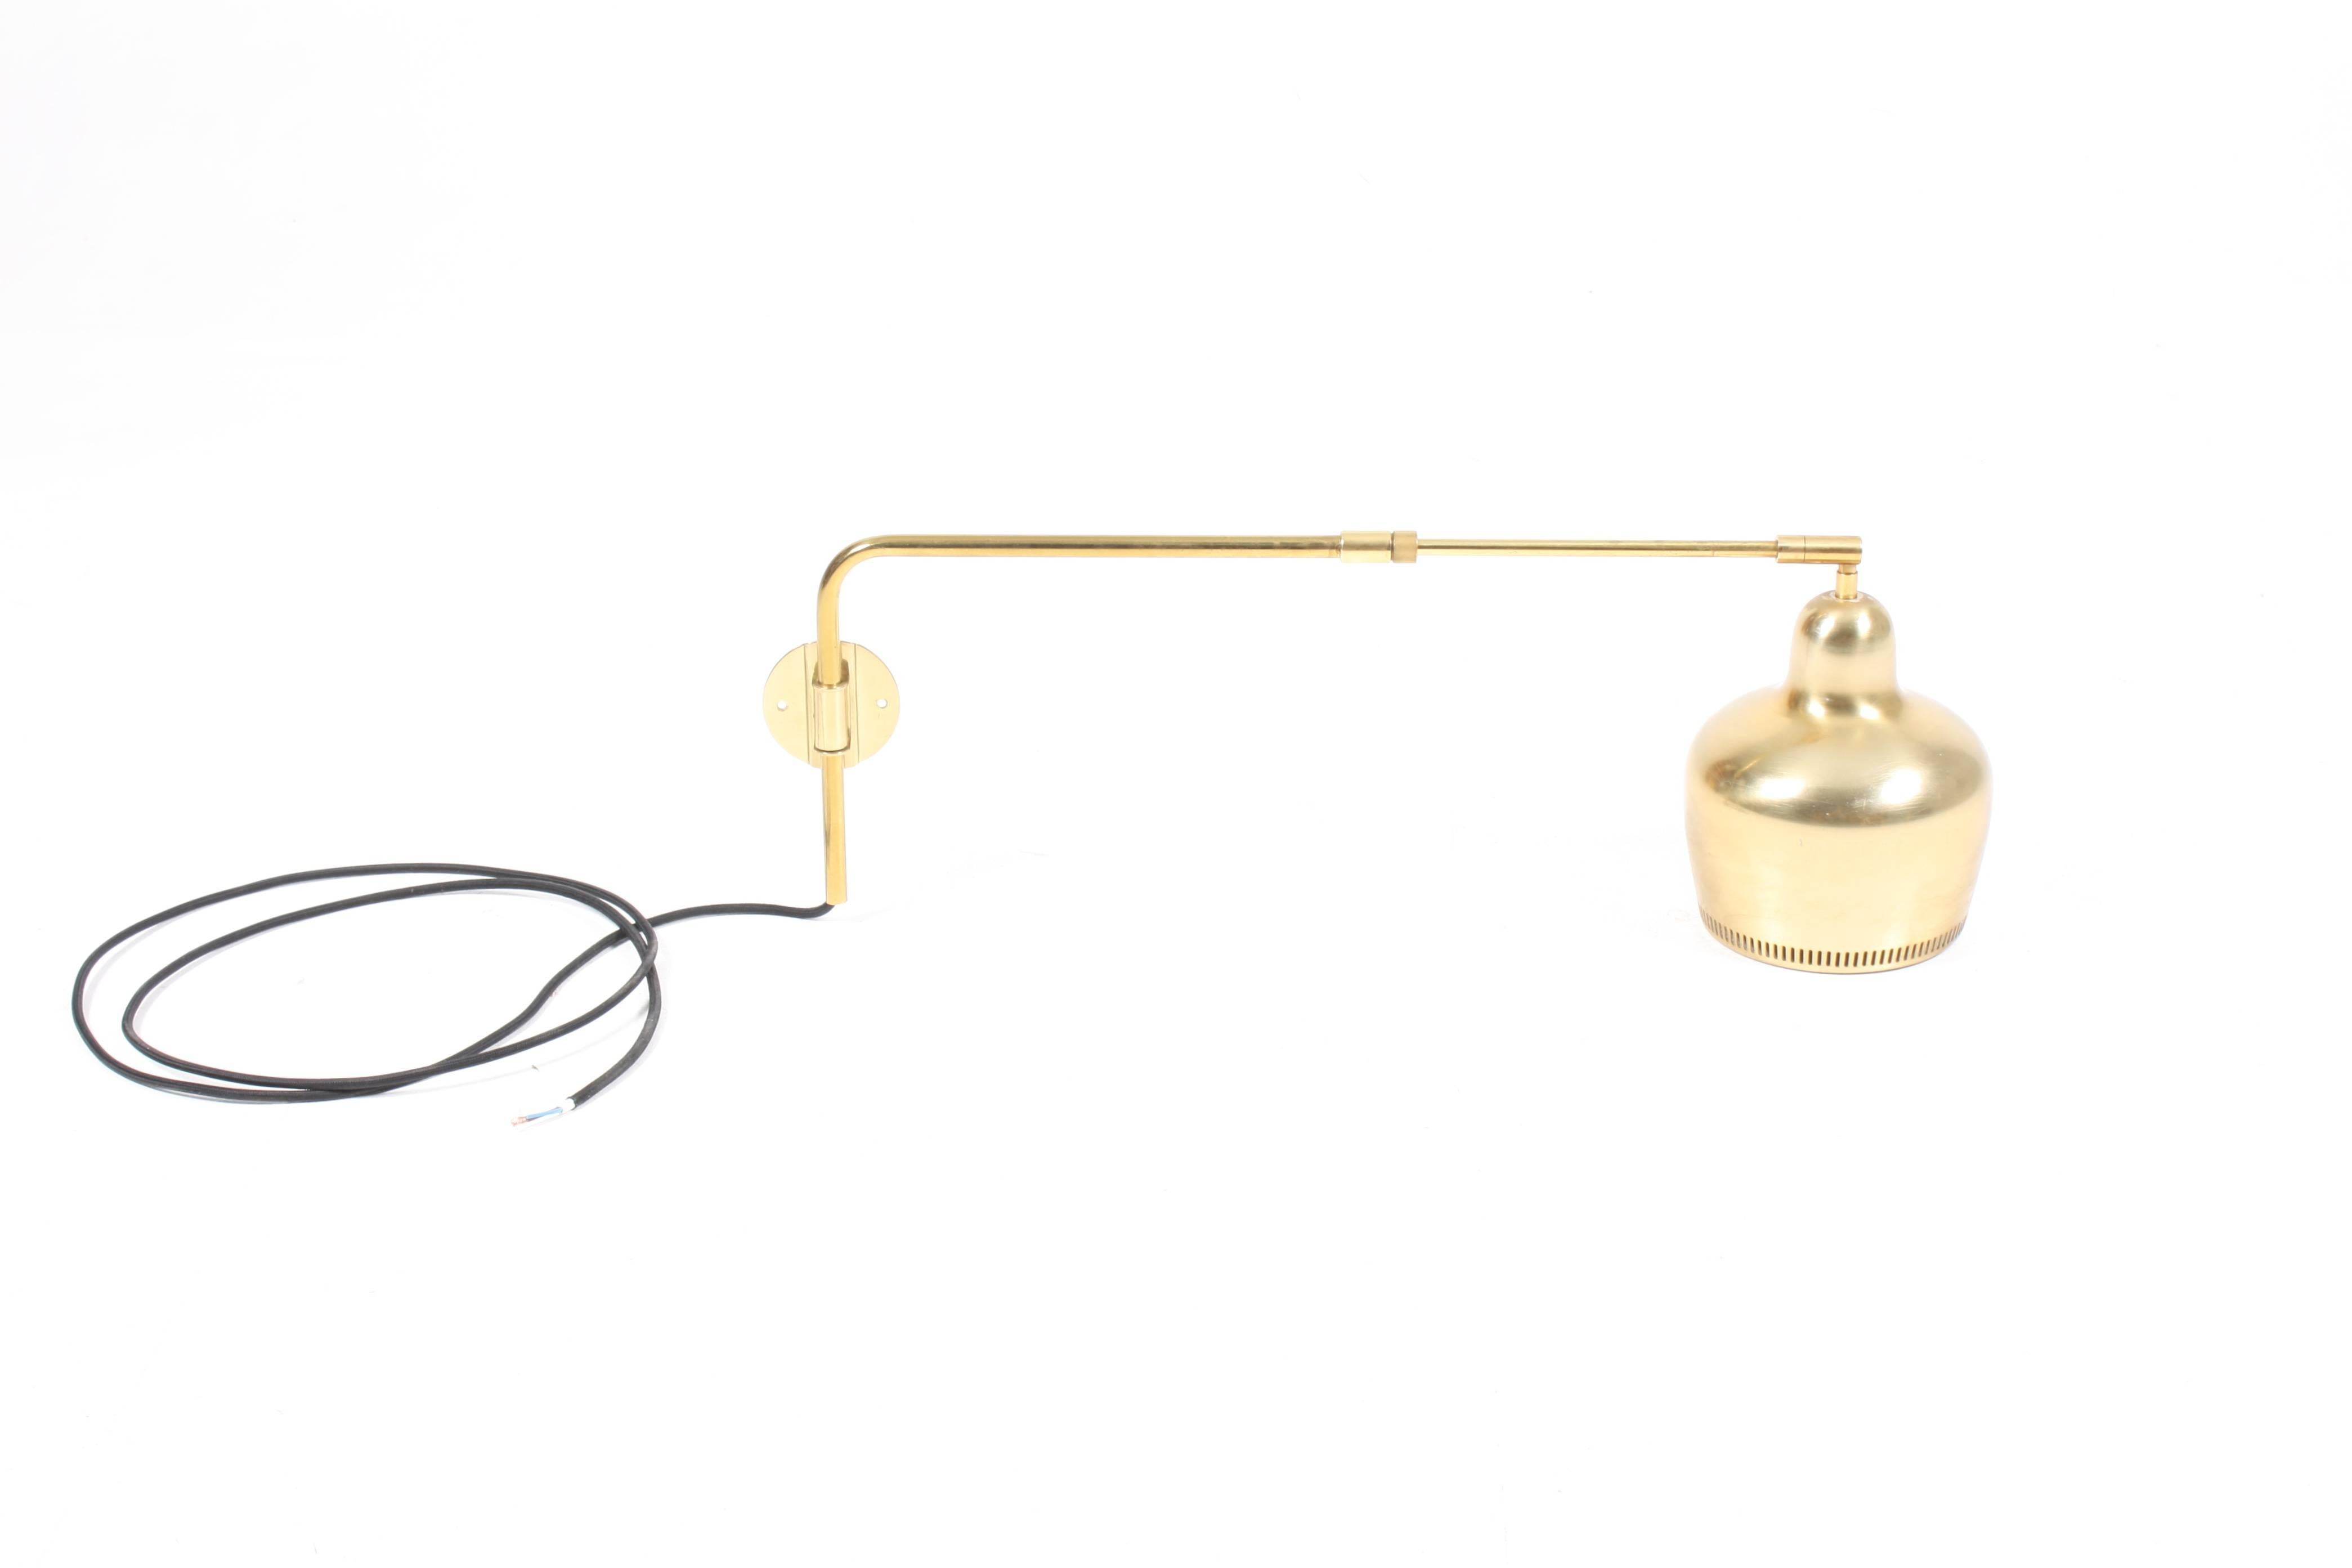 Swivelling wall lamp in patinated brass designed by Finish architect Alvar Aalto for Louis Poulsen Denmark. The lamp is re wired and in good condition. Works well behind a sofa or reading chair.
 